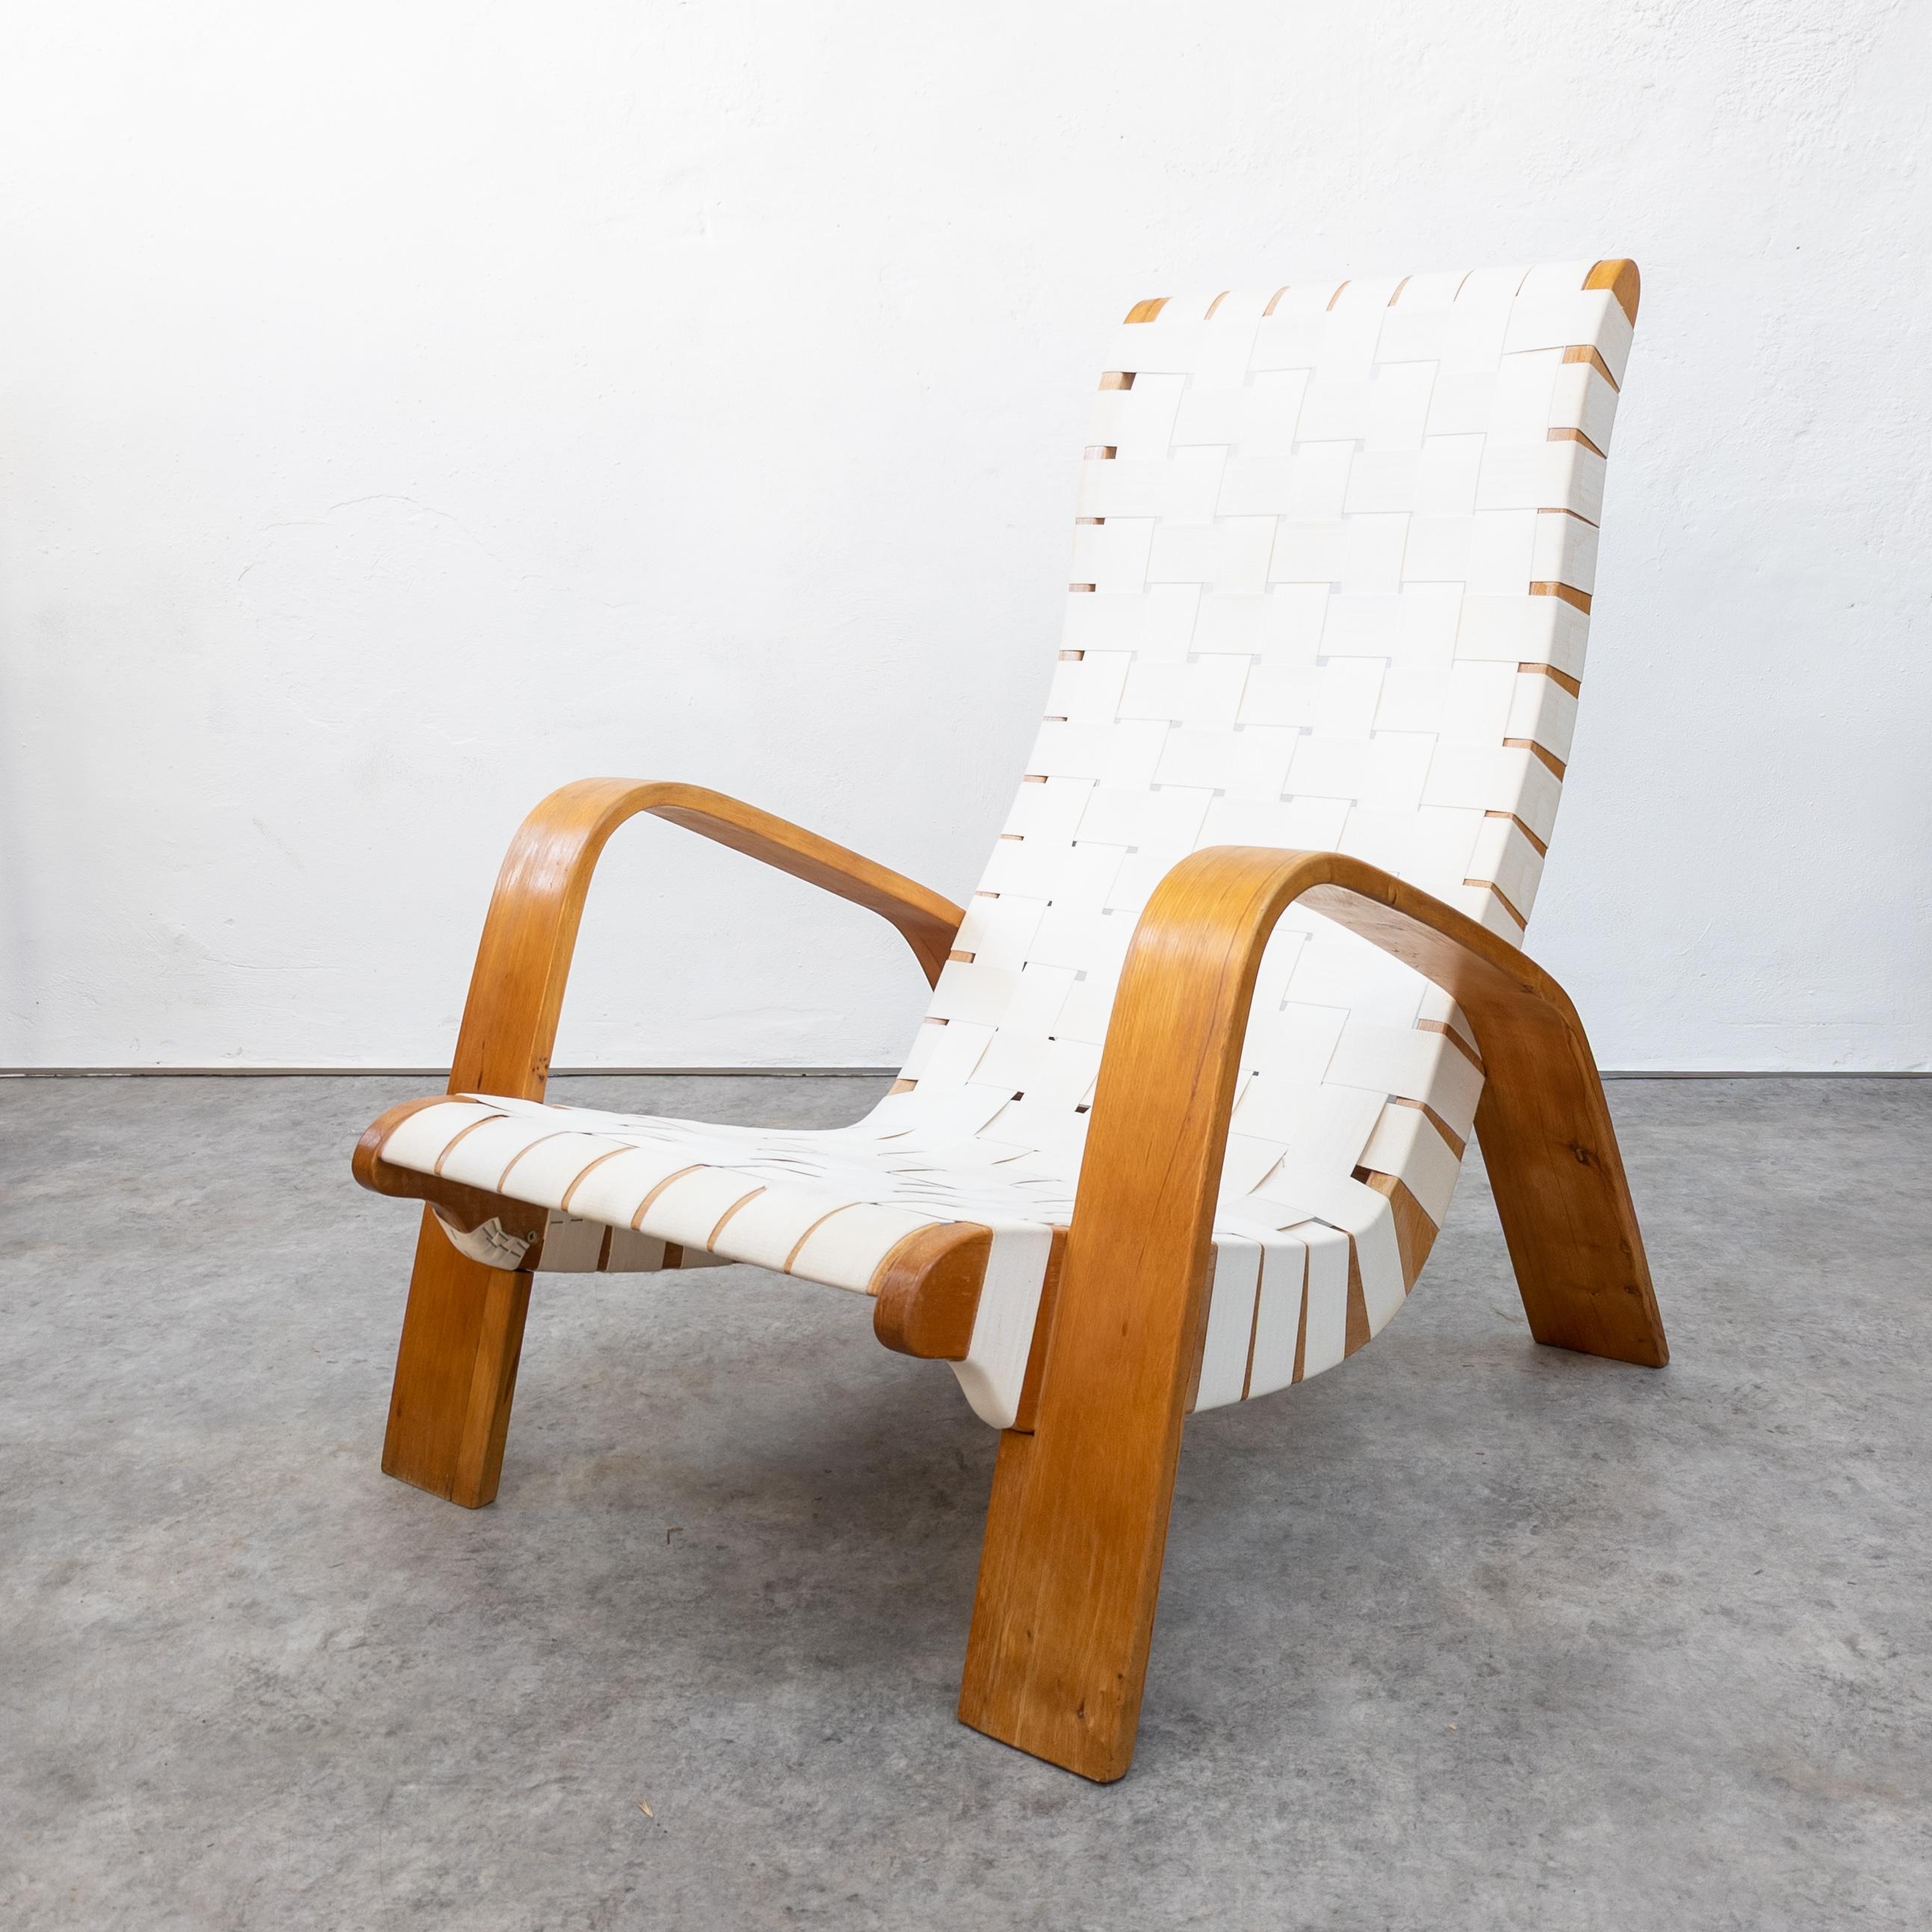 Unique lounge chair with footstool manufactured by Krásná Jizba, former Czechoslovakia in the late 1940s. Designed probably by architect Zdenek Plesník. Beautiful sculptural appearance. Made of beech wood, plywood and canvas webbing. Wood in